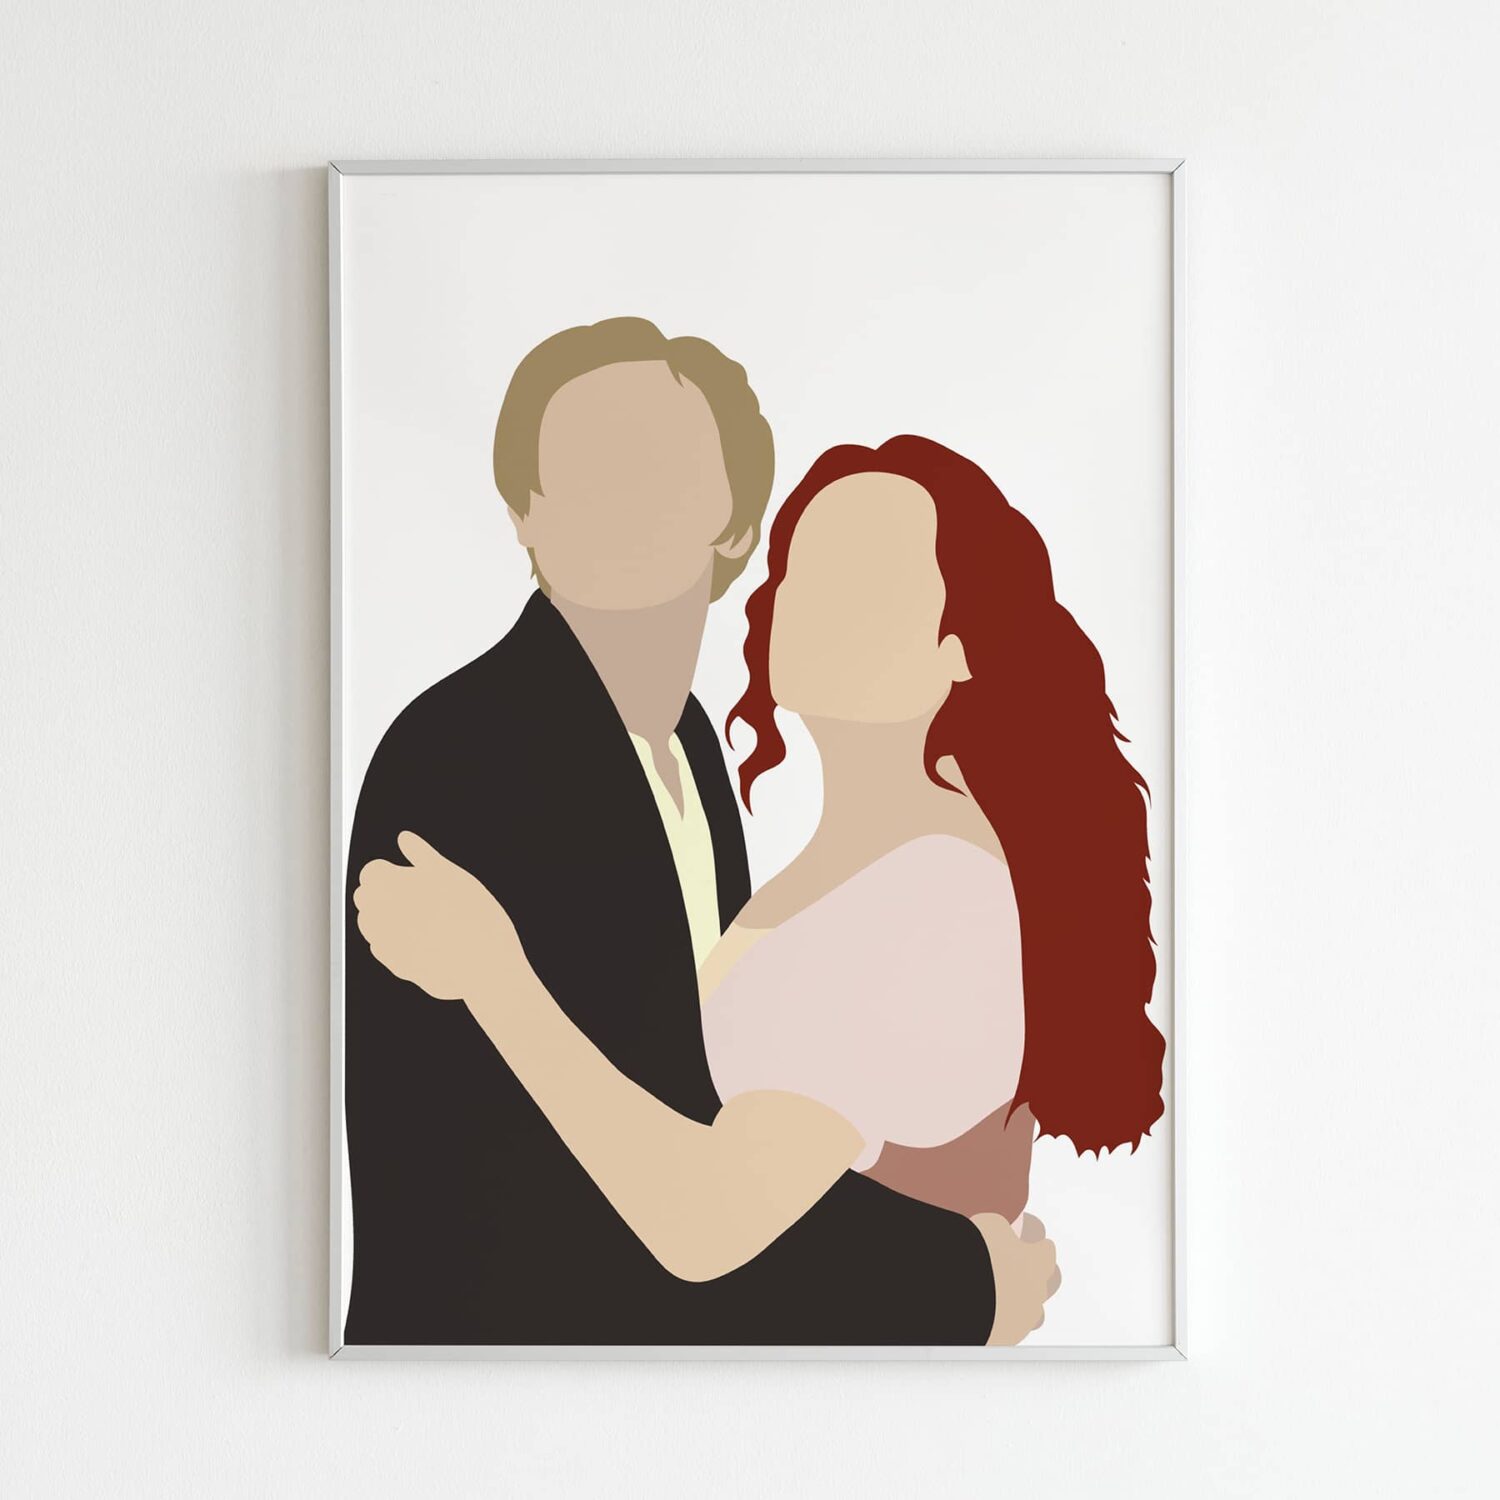 Minimalist Titanic Poster featuring illustrations of Jack and Rose